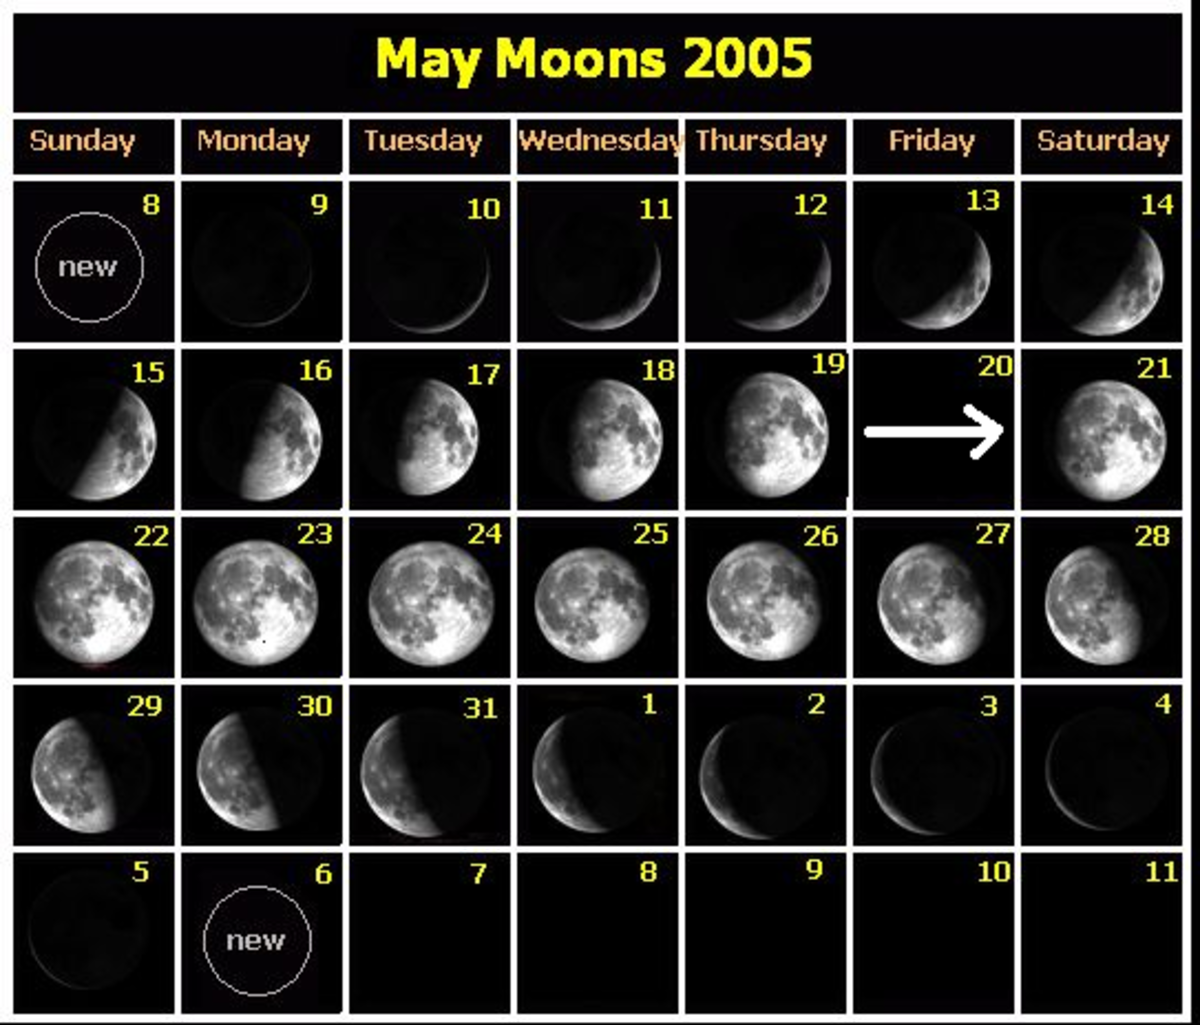 Phases of the moon during one month